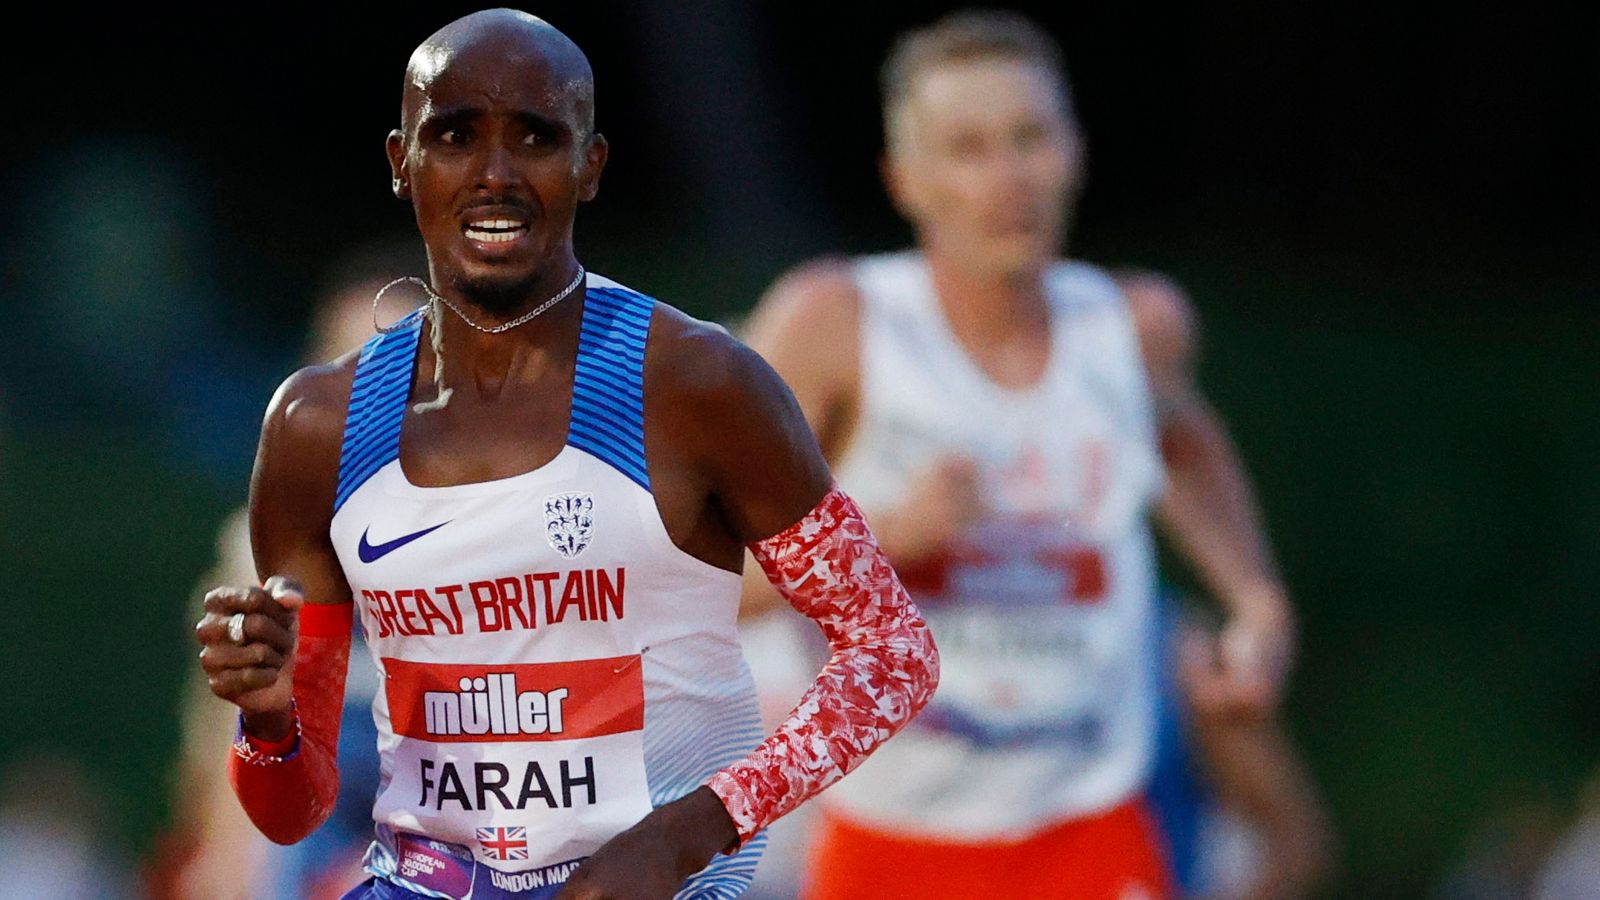 Mo Farah’s Olympic hopes in doubt after he falls 22 seconds short of the time needed to qualify